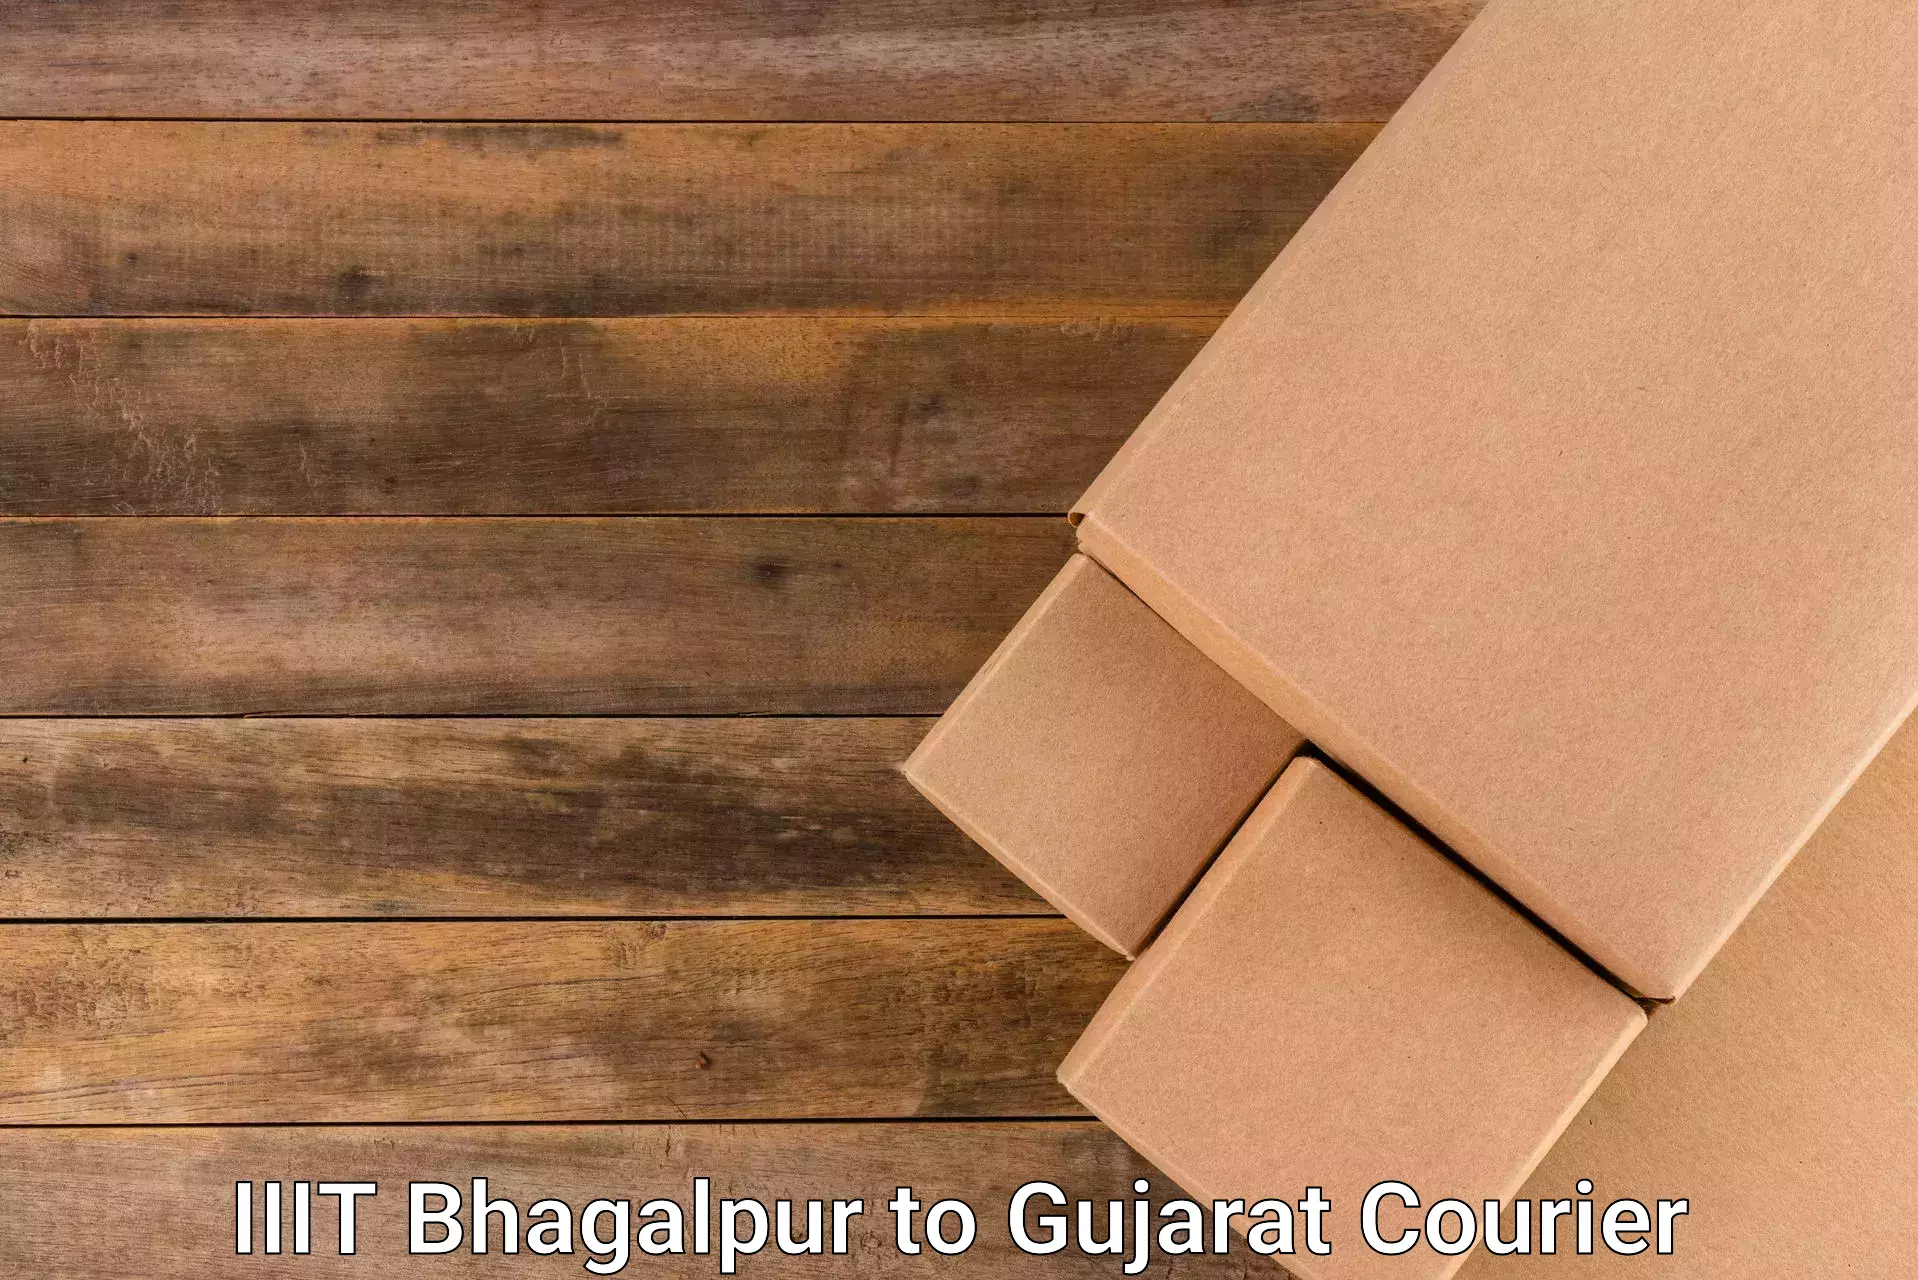 Streamlined delivery processes IIIT Bhagalpur to Bhuj